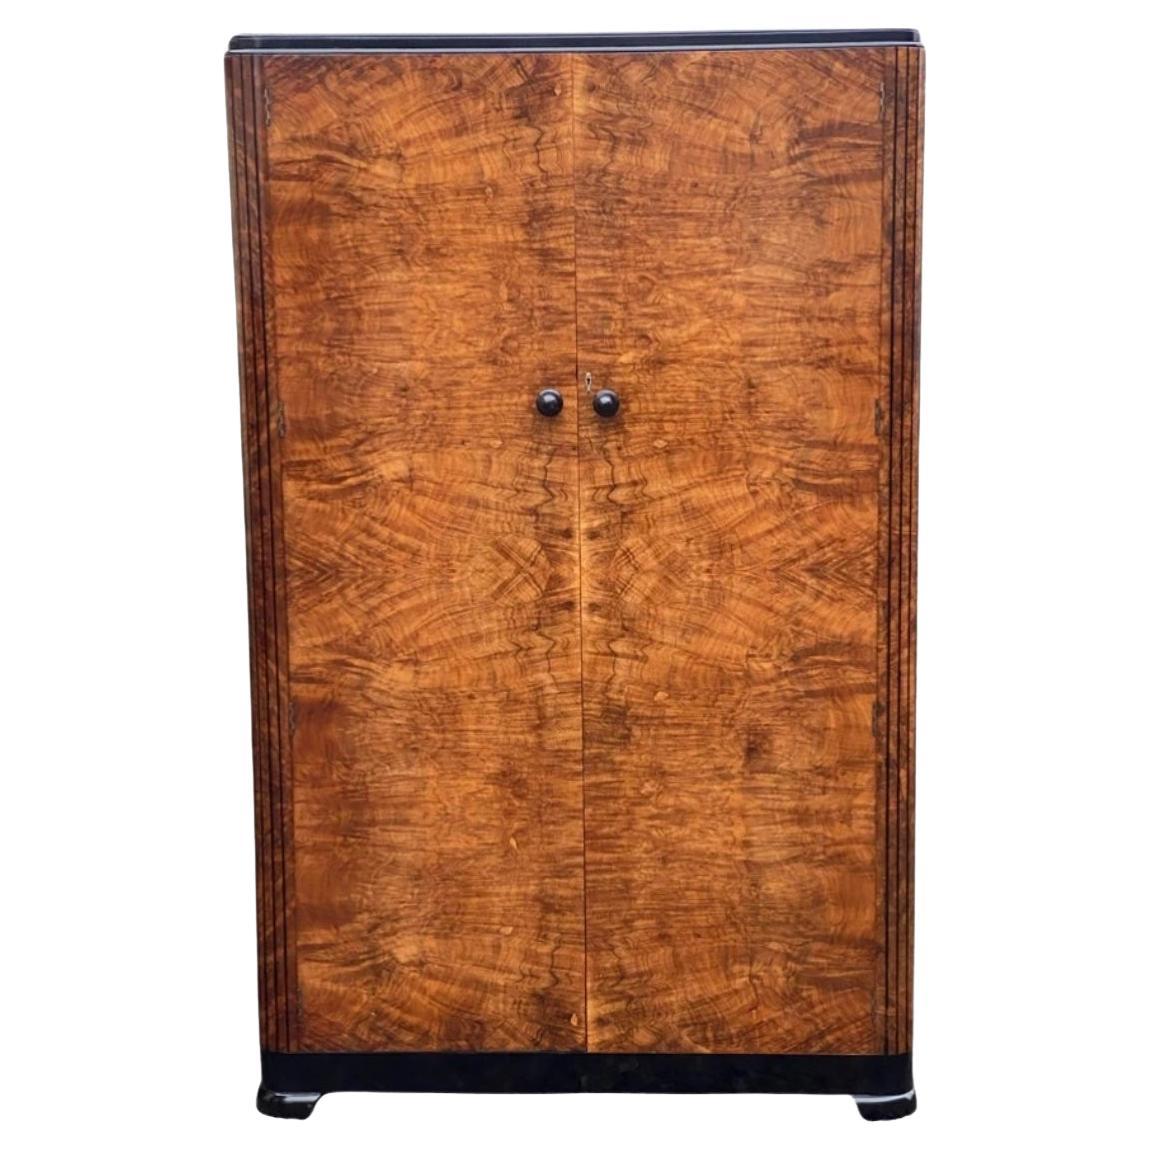 A fabulous 1930’s Art Deco Period Wardrobe with Bookpaged Oyster Veneers For Sale